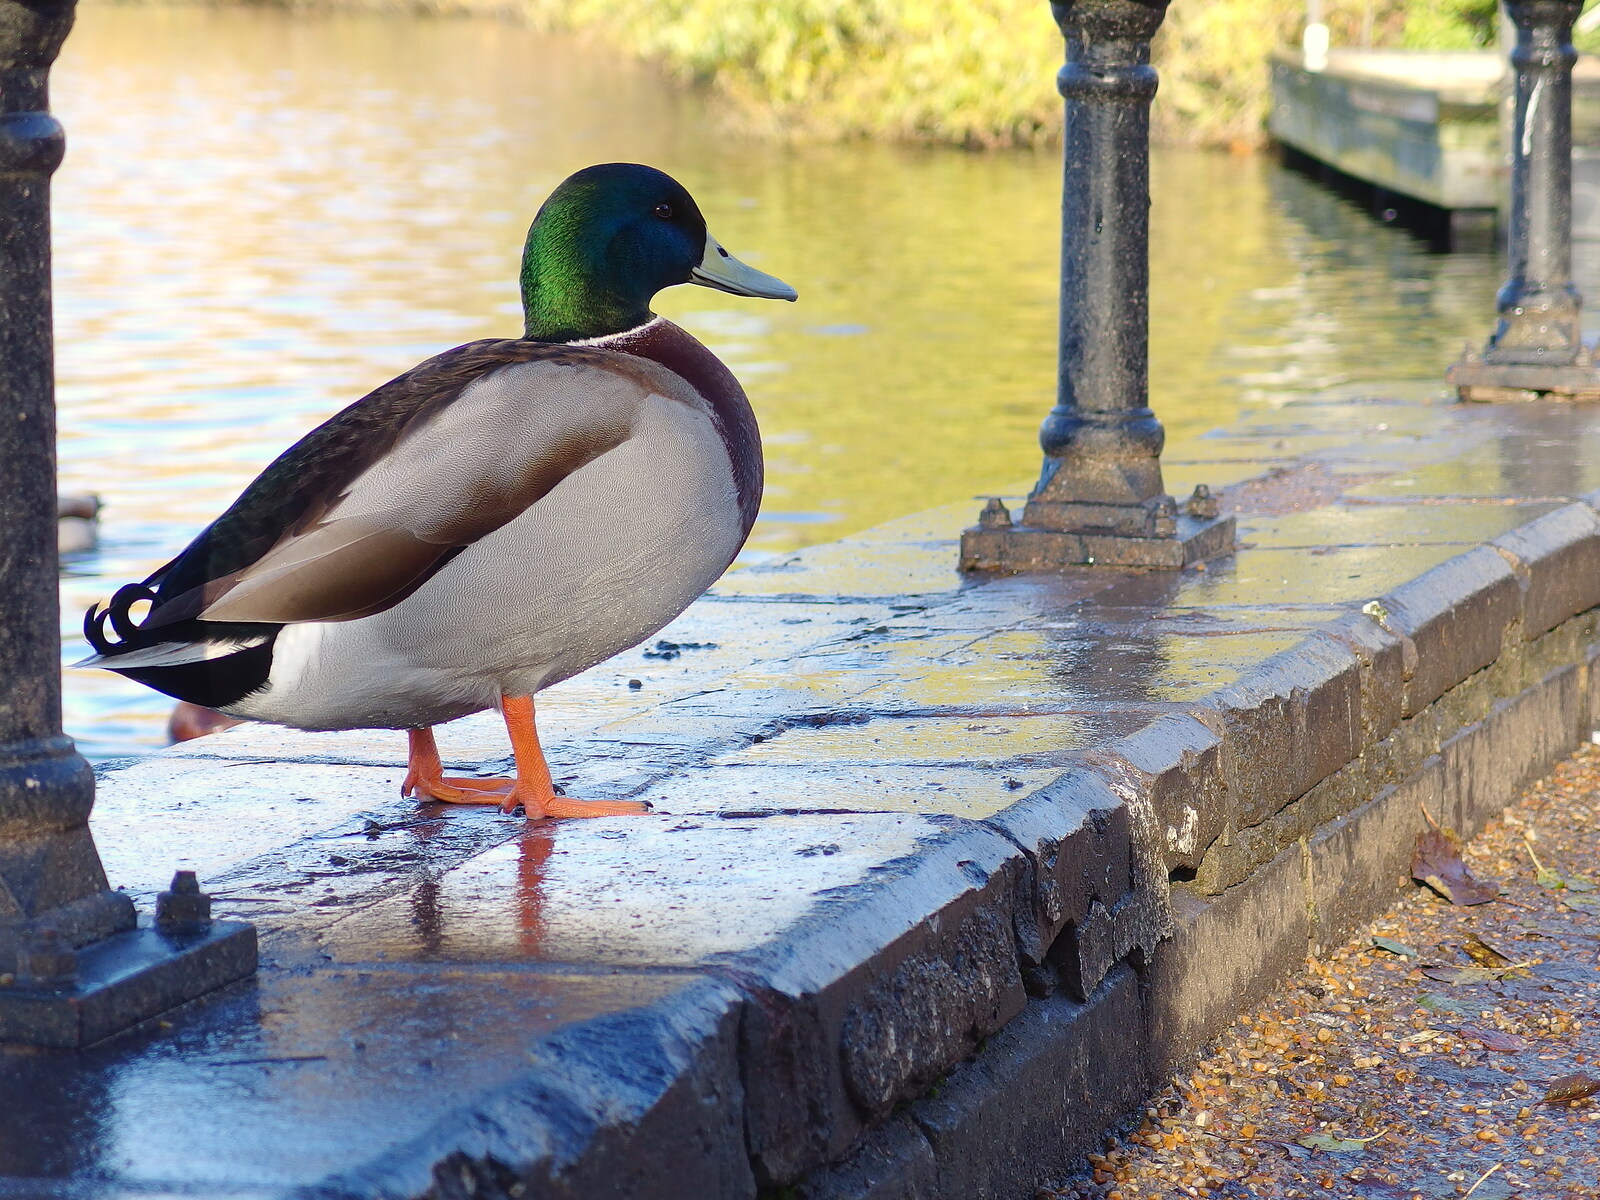 More Building and Palgrave Playground, Suffolk - 24th November 2013: A mallard on the wall by the Mere